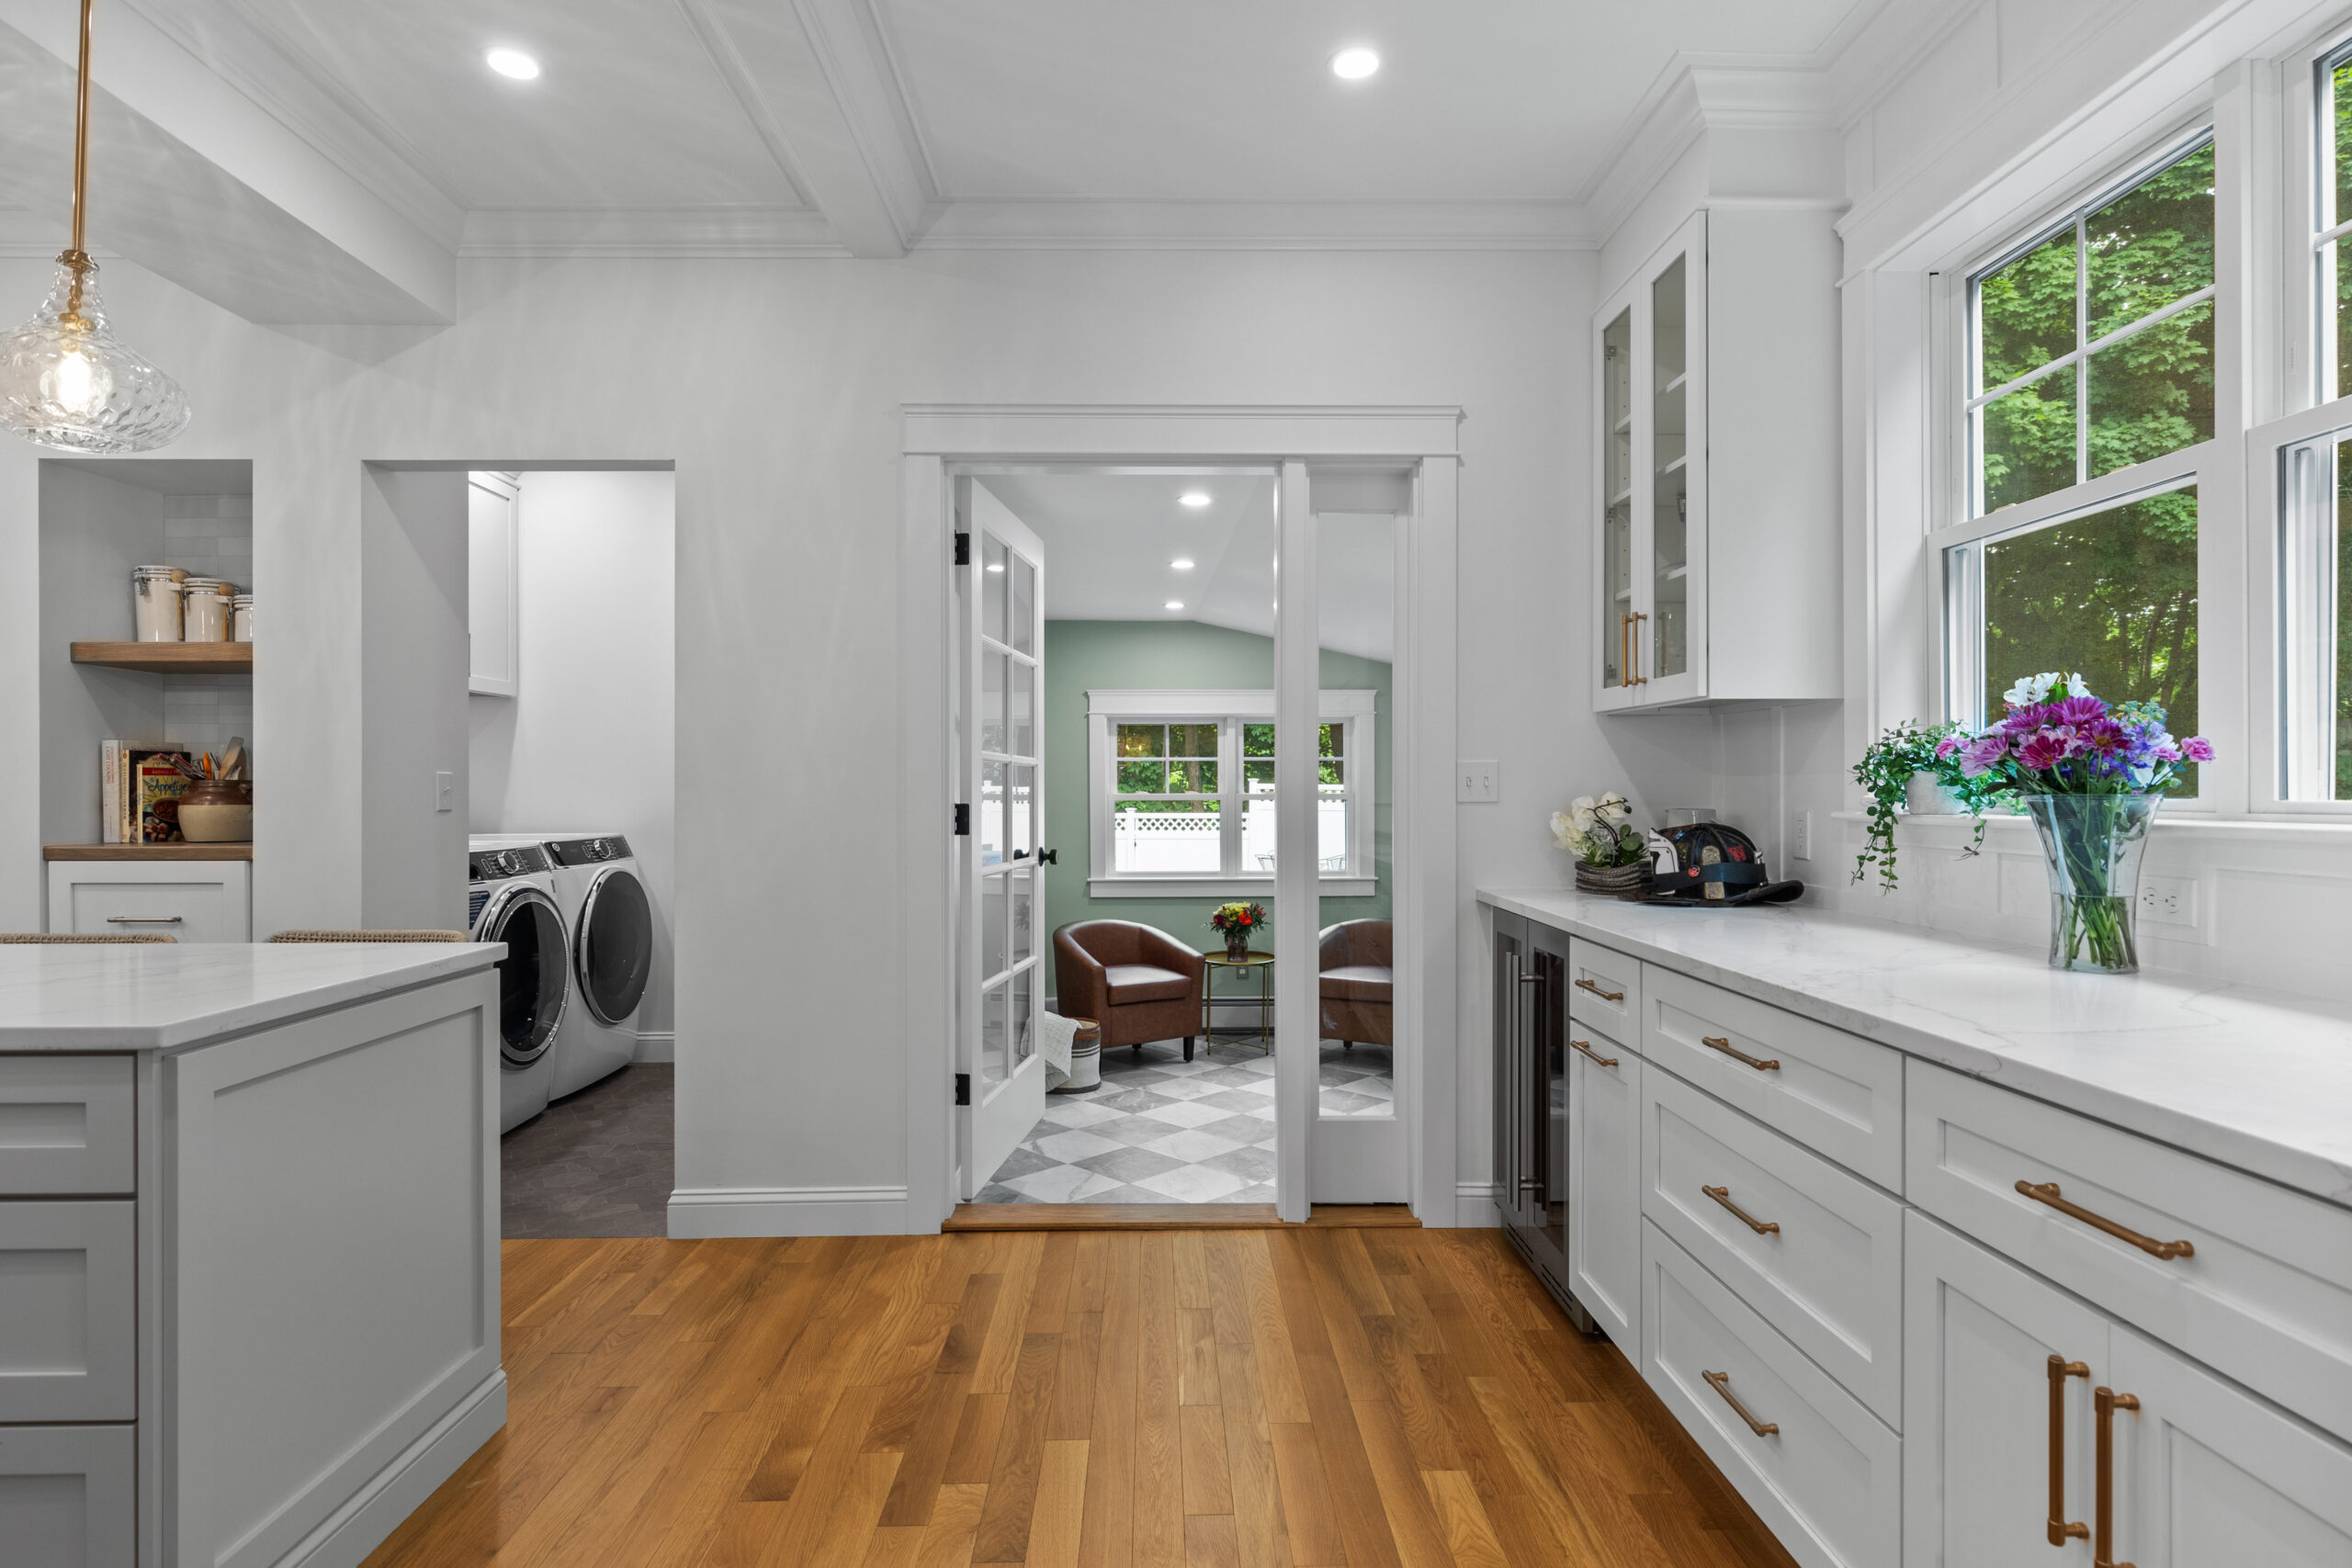 Image of a beautifully renovated kitchen in a vintage New England home, showcasing the open view into a sunroom. The kitchen features white cabinetry, marble countertops, and hardwood floors. French doors lead to the sunroom, which has been updated with green walls and modern furniture, creating a seamless and inviting transition between spaces.